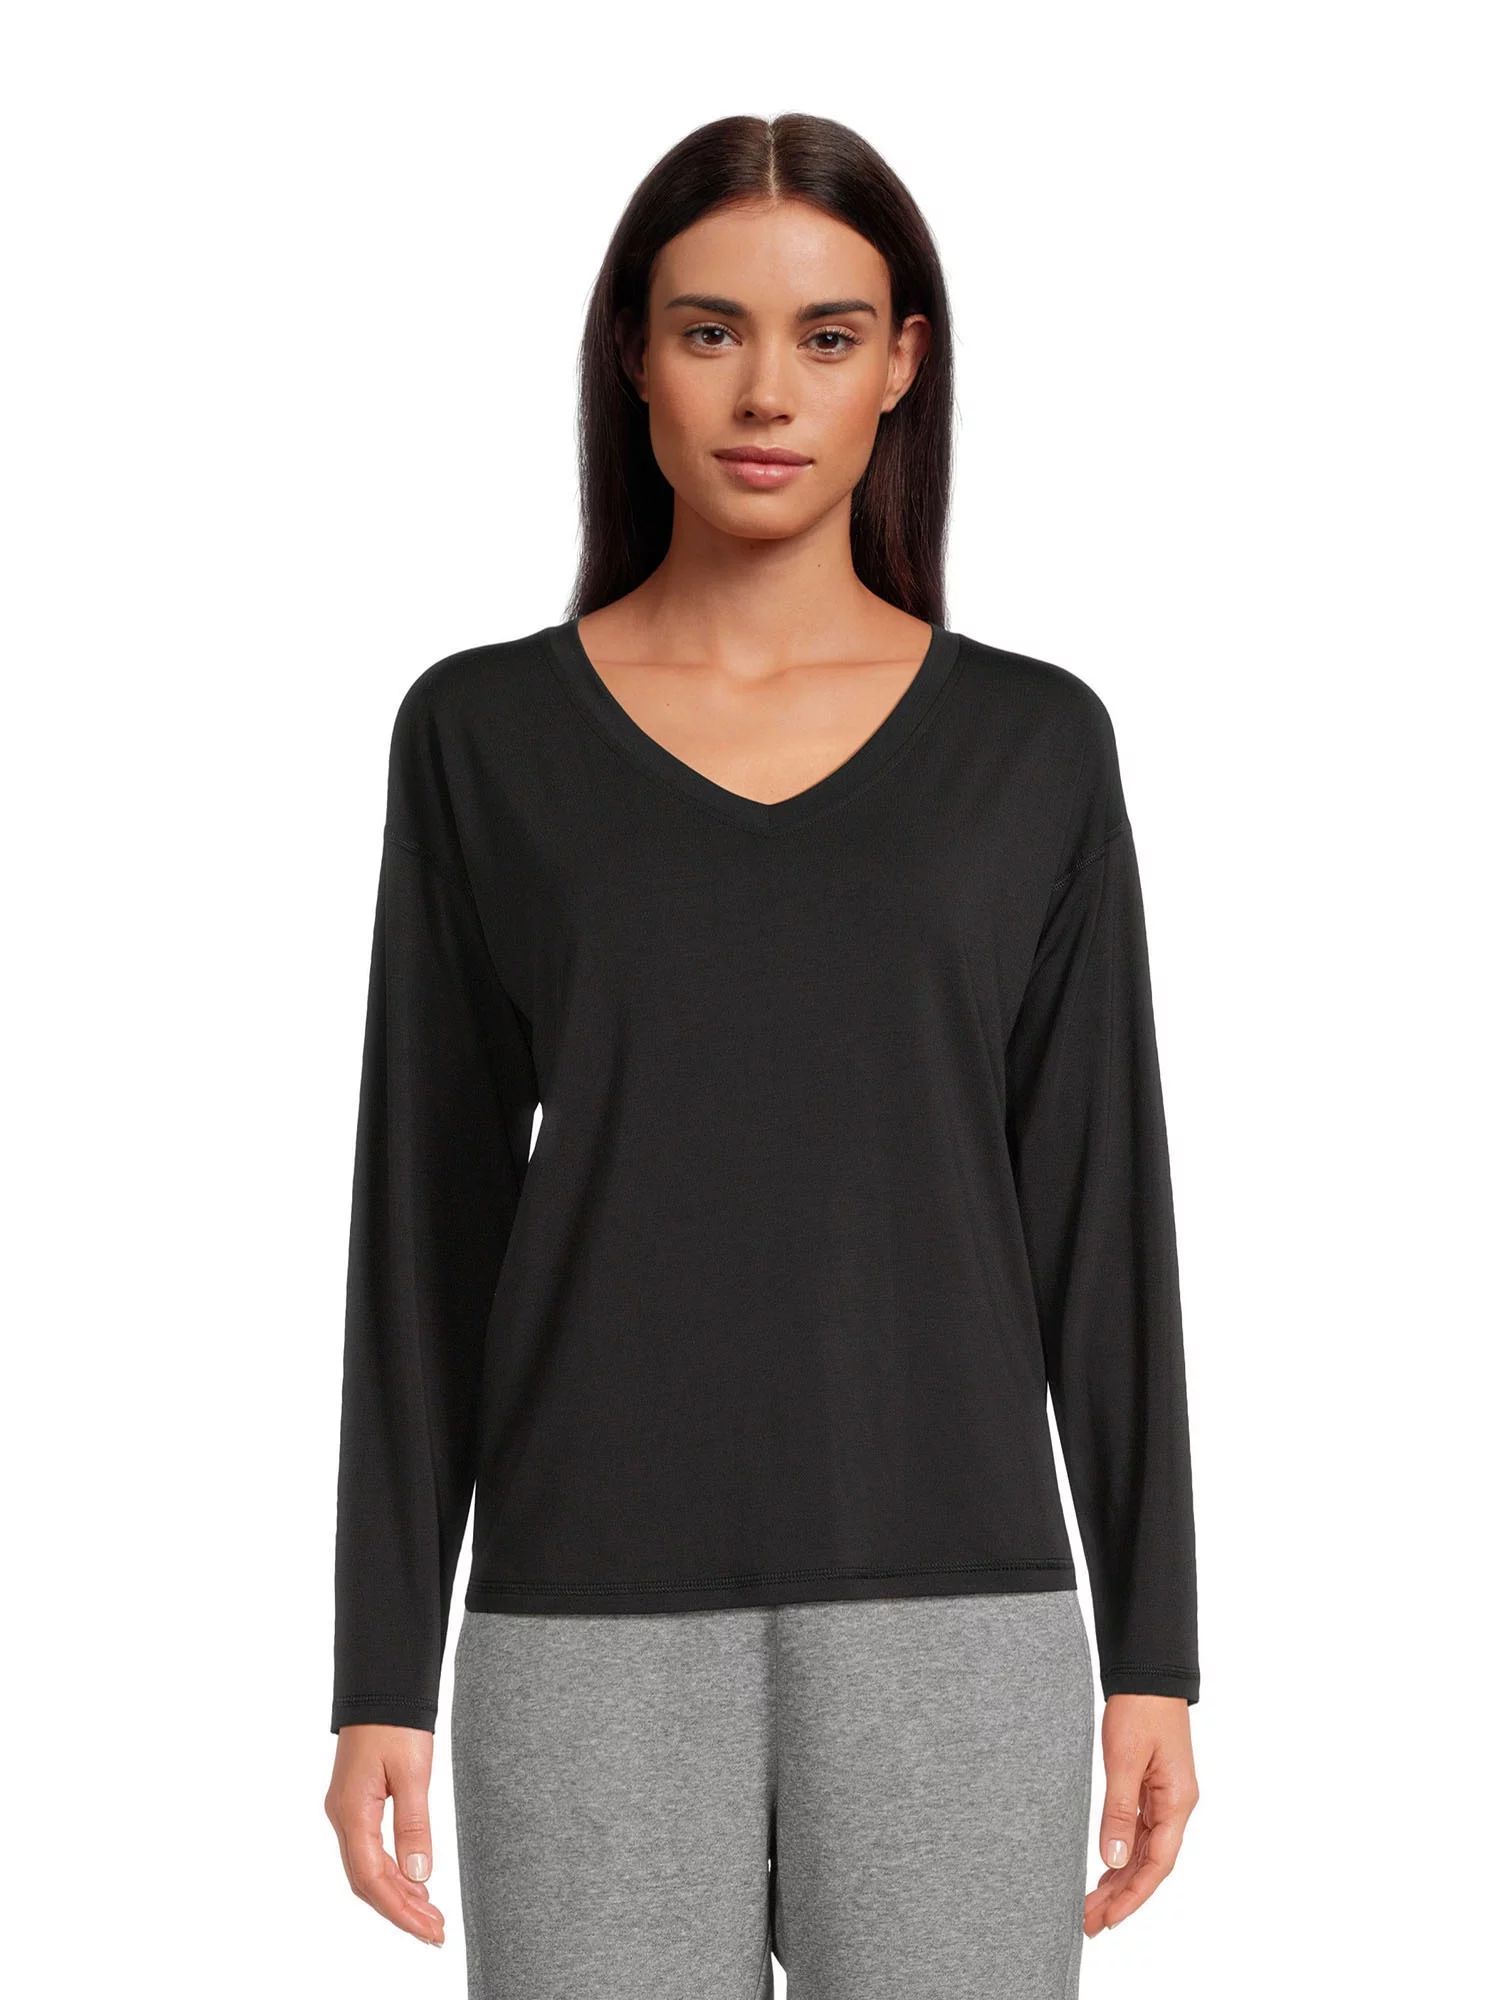 Athletic Works Women’s Dri More Boxy Tee with Long Sleeves, Sizes XS-3XL | Walmart (US)